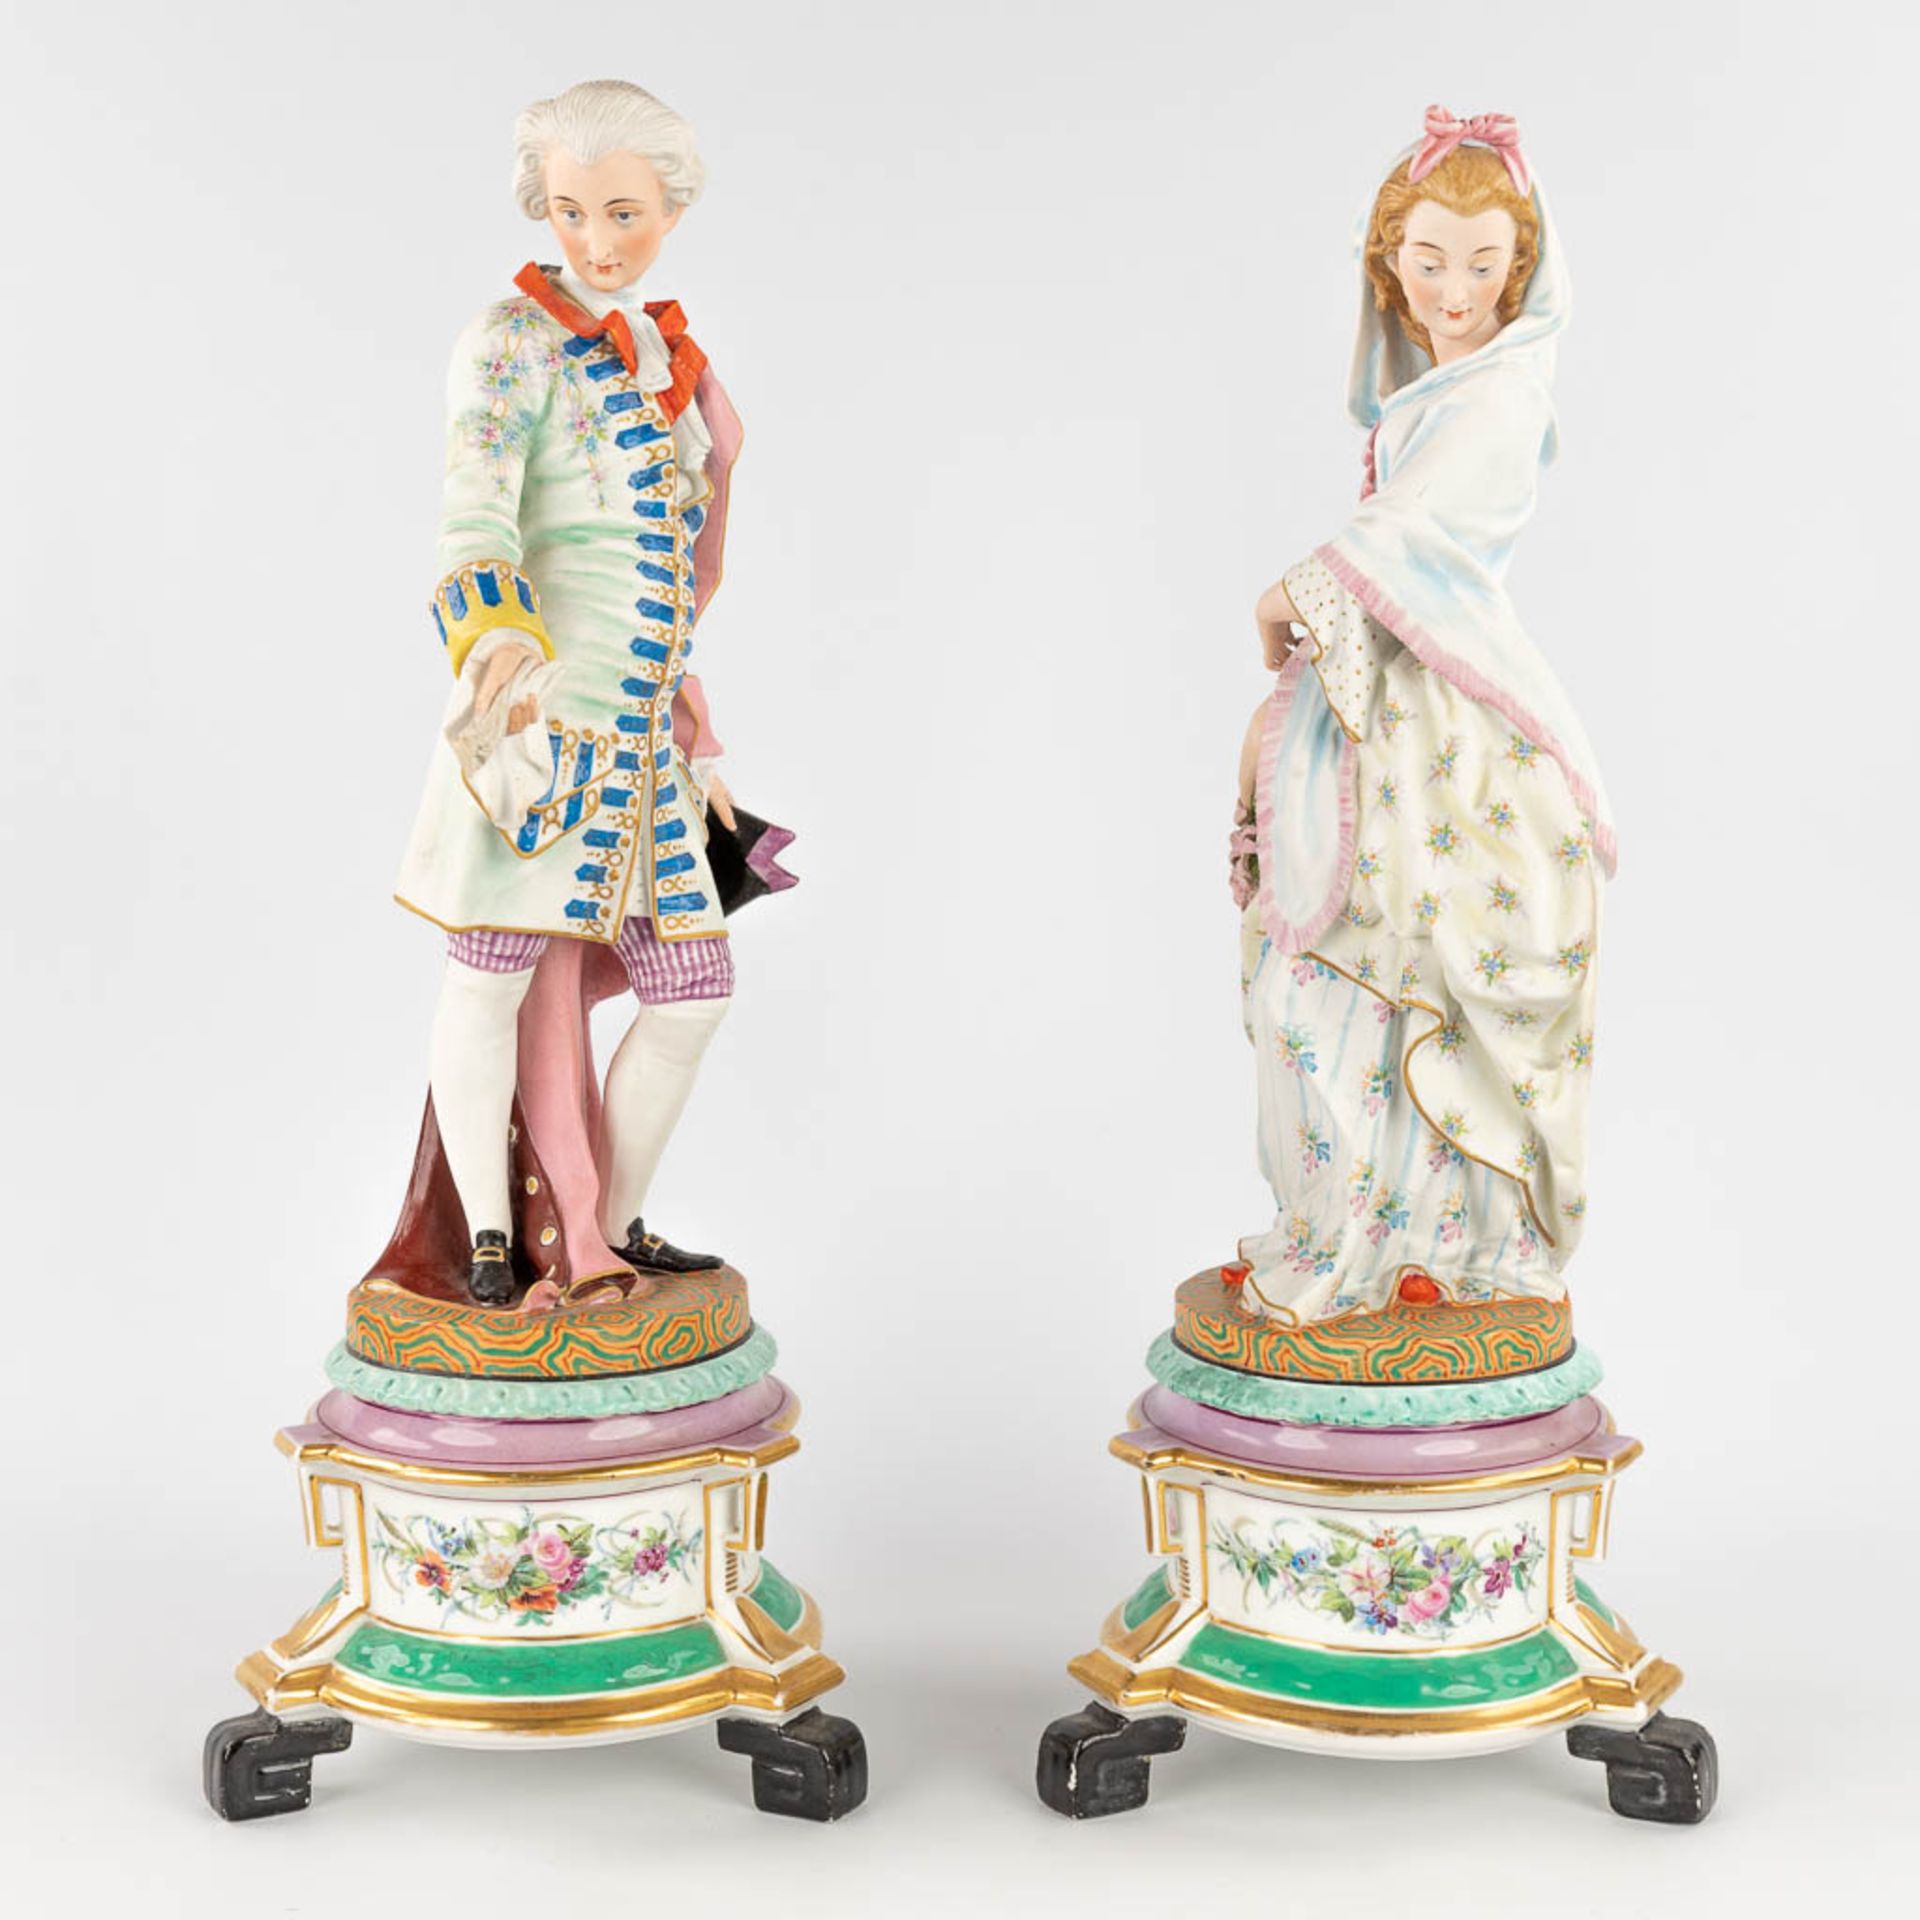 A pair of antique bisque figurines, standing on a glazed porcelain base. (L: 18 x W: 18 x H: 49 cm)